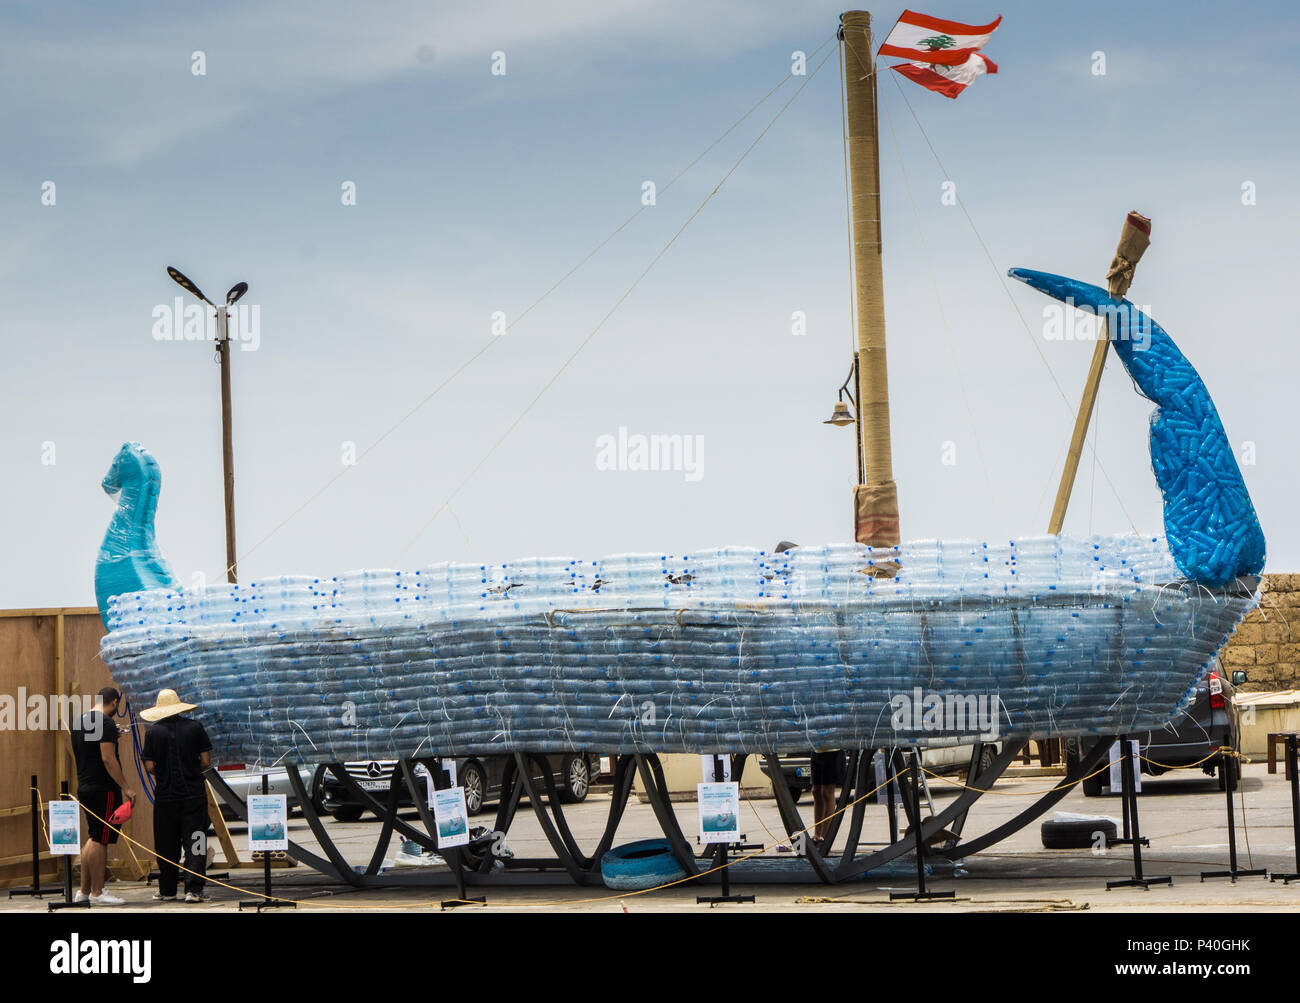 Phoenician ship made of thousands of plastic bottles to raise environmental awareness Stock Photo